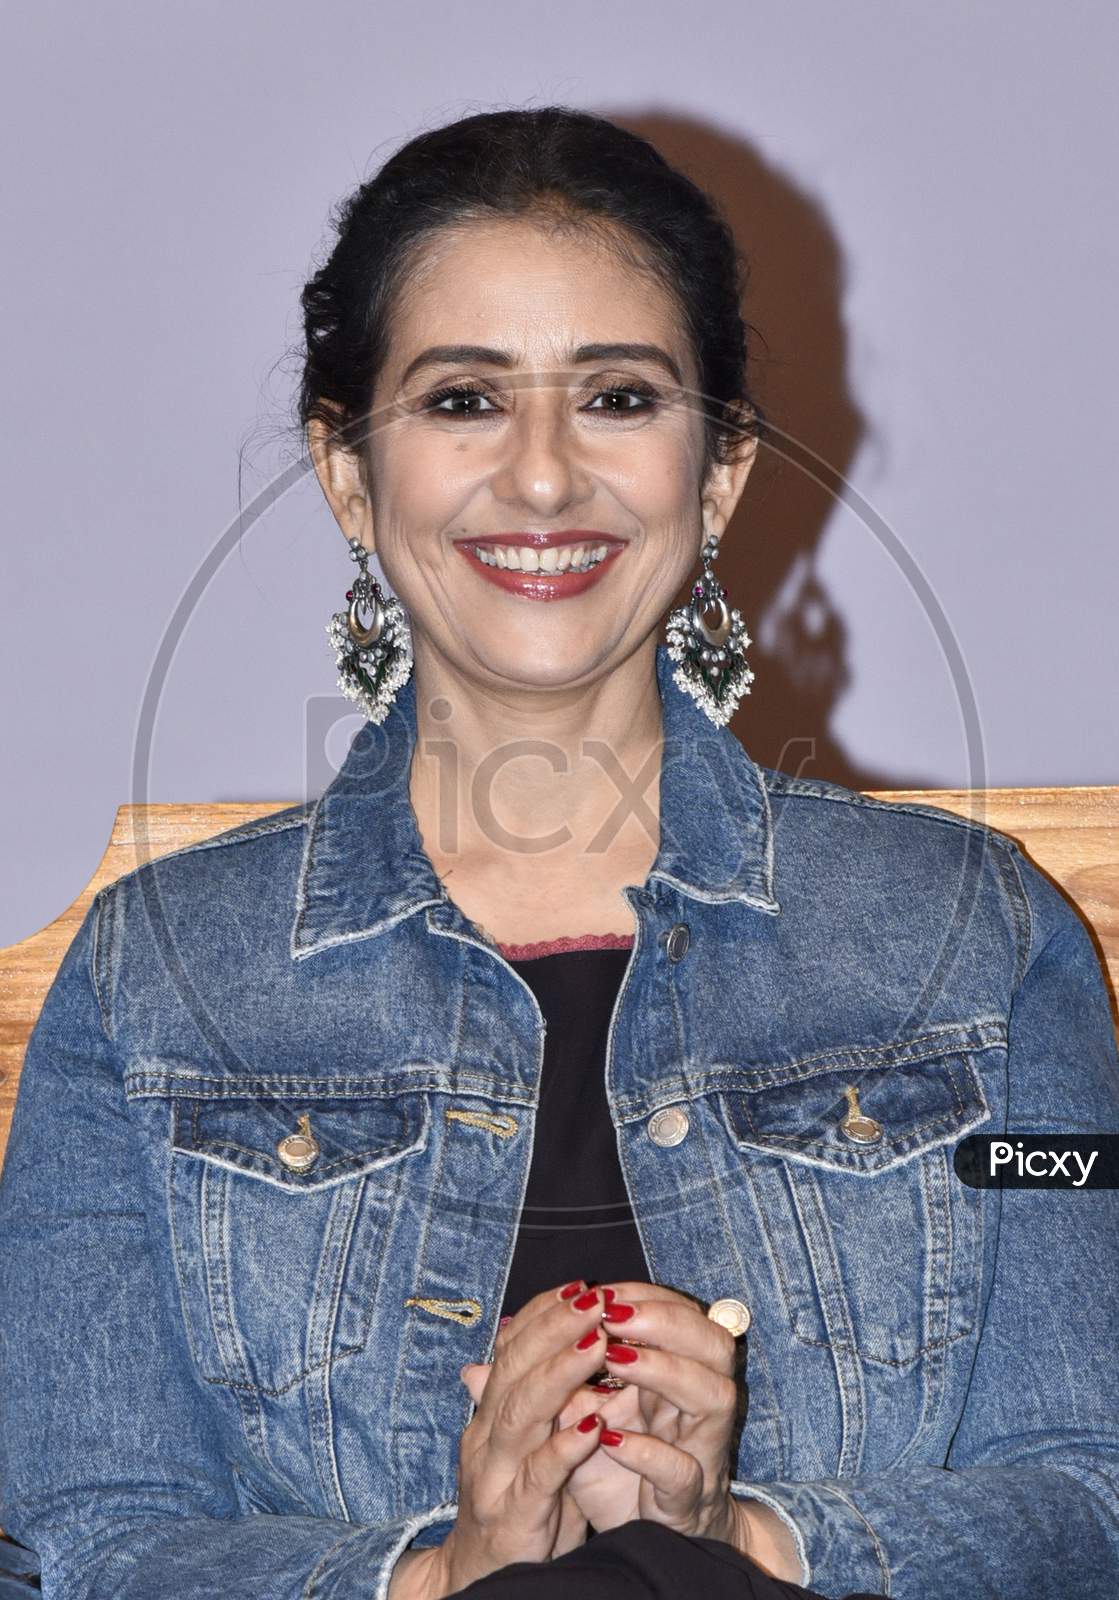 Bollywood Actress Manisha Koirala During 3Rd Brahmaputra Literary Festival, Organised By Publication Board Assam And Supported By The Assam Government At Sankardev Kalakhetra In Guwahati, Assam On February 10, 2019.